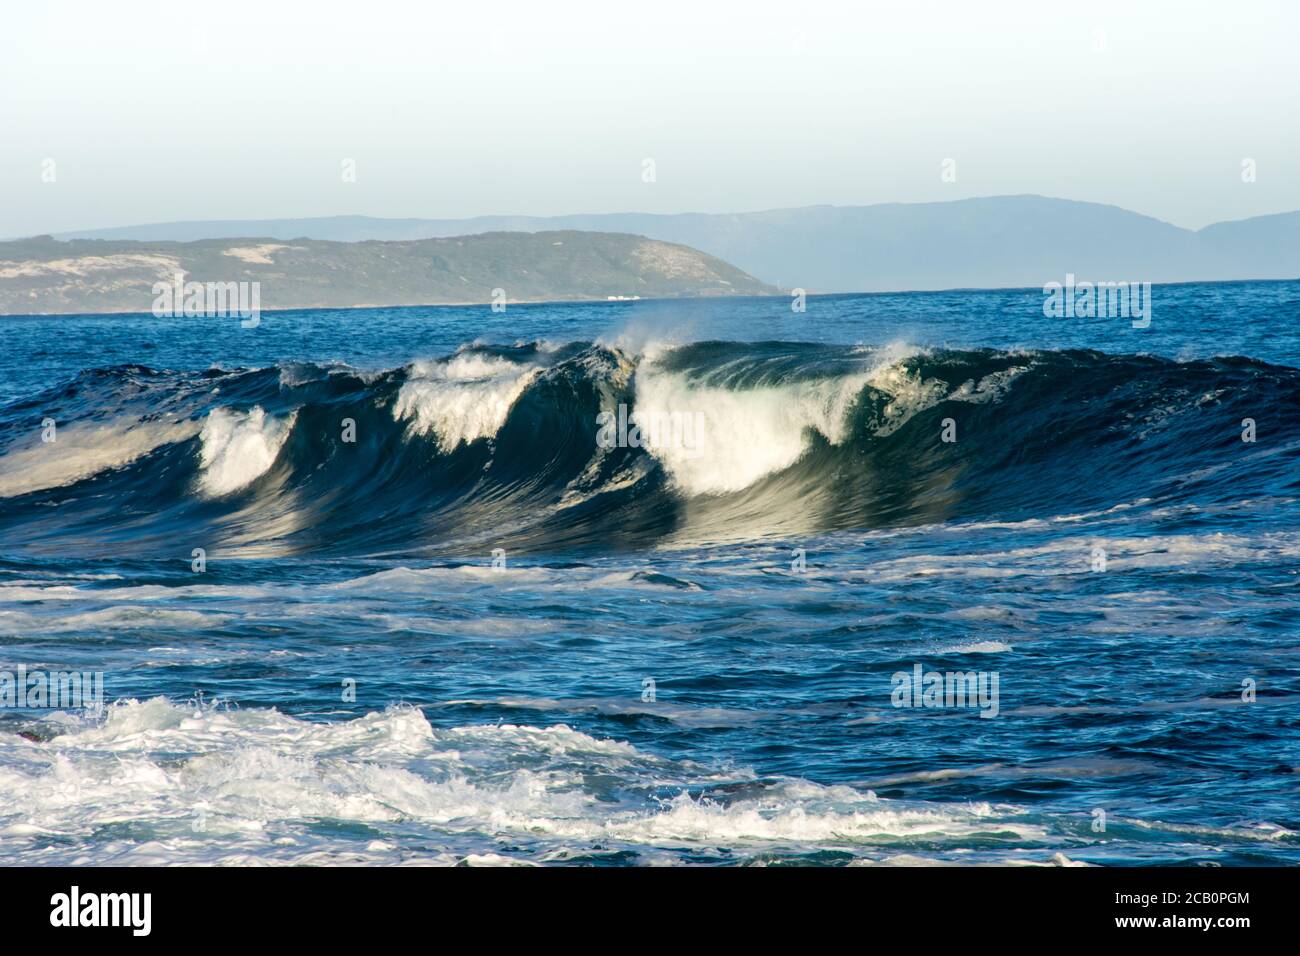 Wave breaking with sunlight reflecting from water and white foam blown in the wind seen from a side view Stock Photo